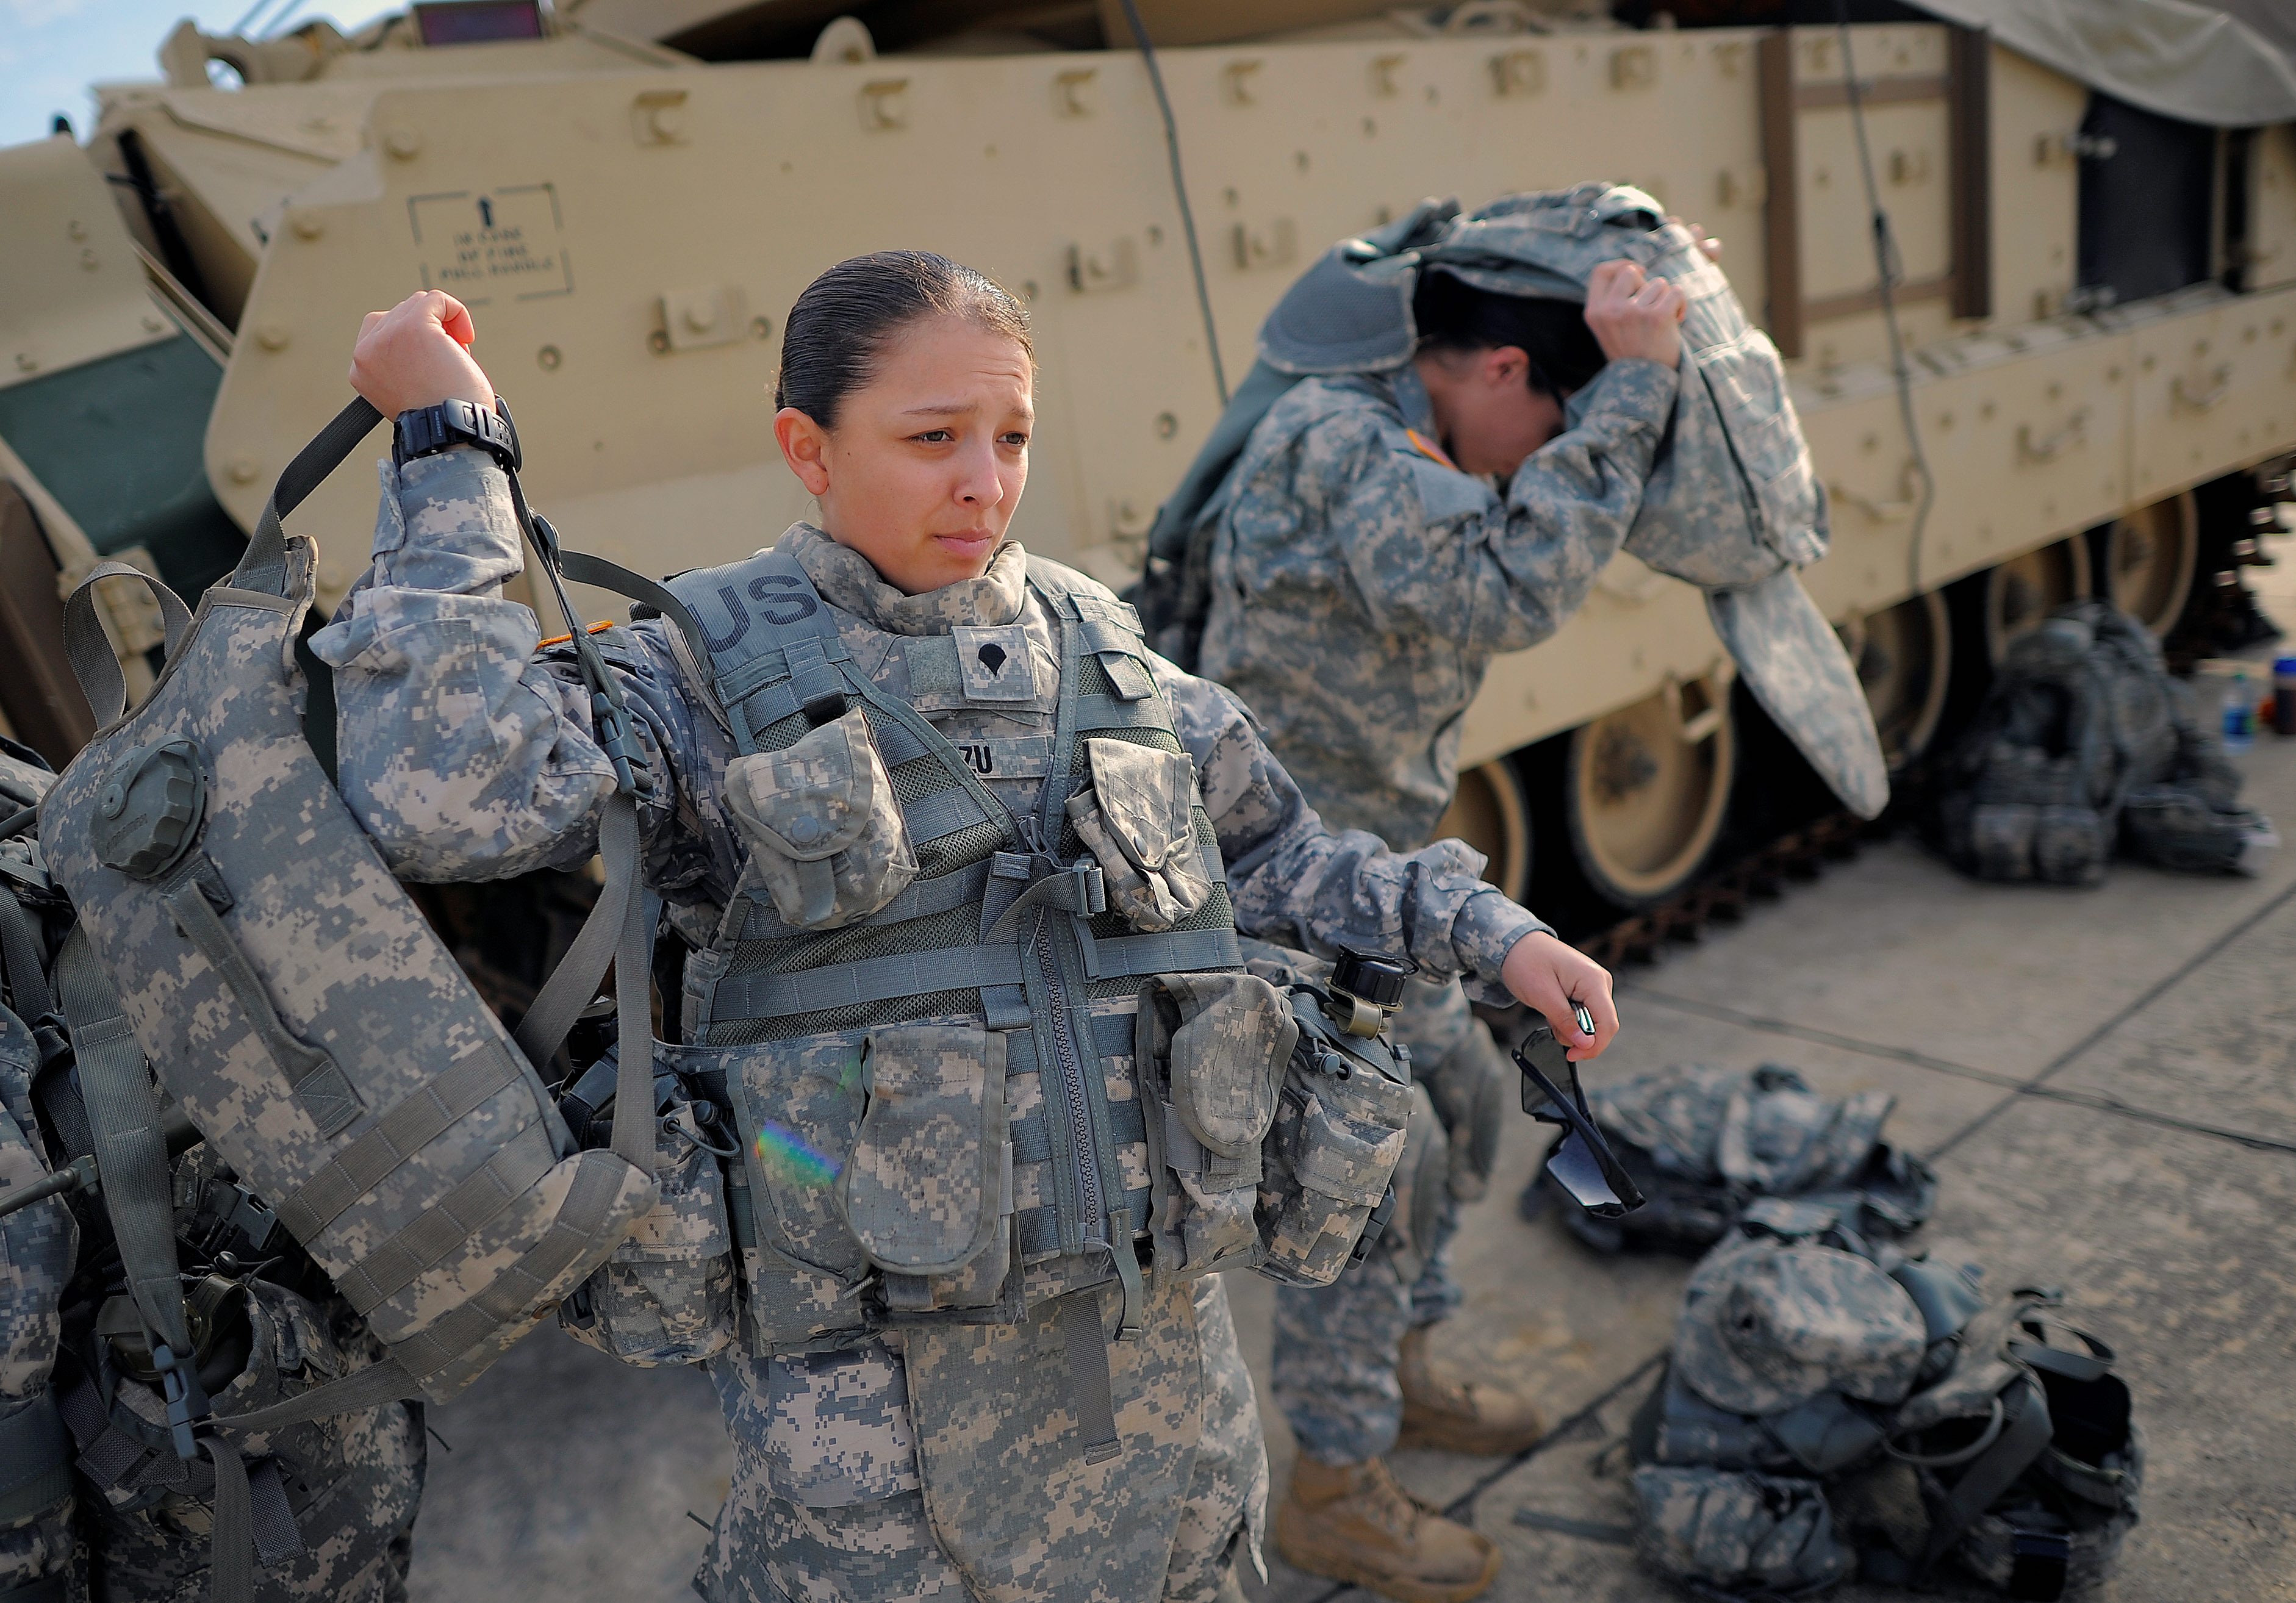 Women in combat: Test failures raise questions about how many can